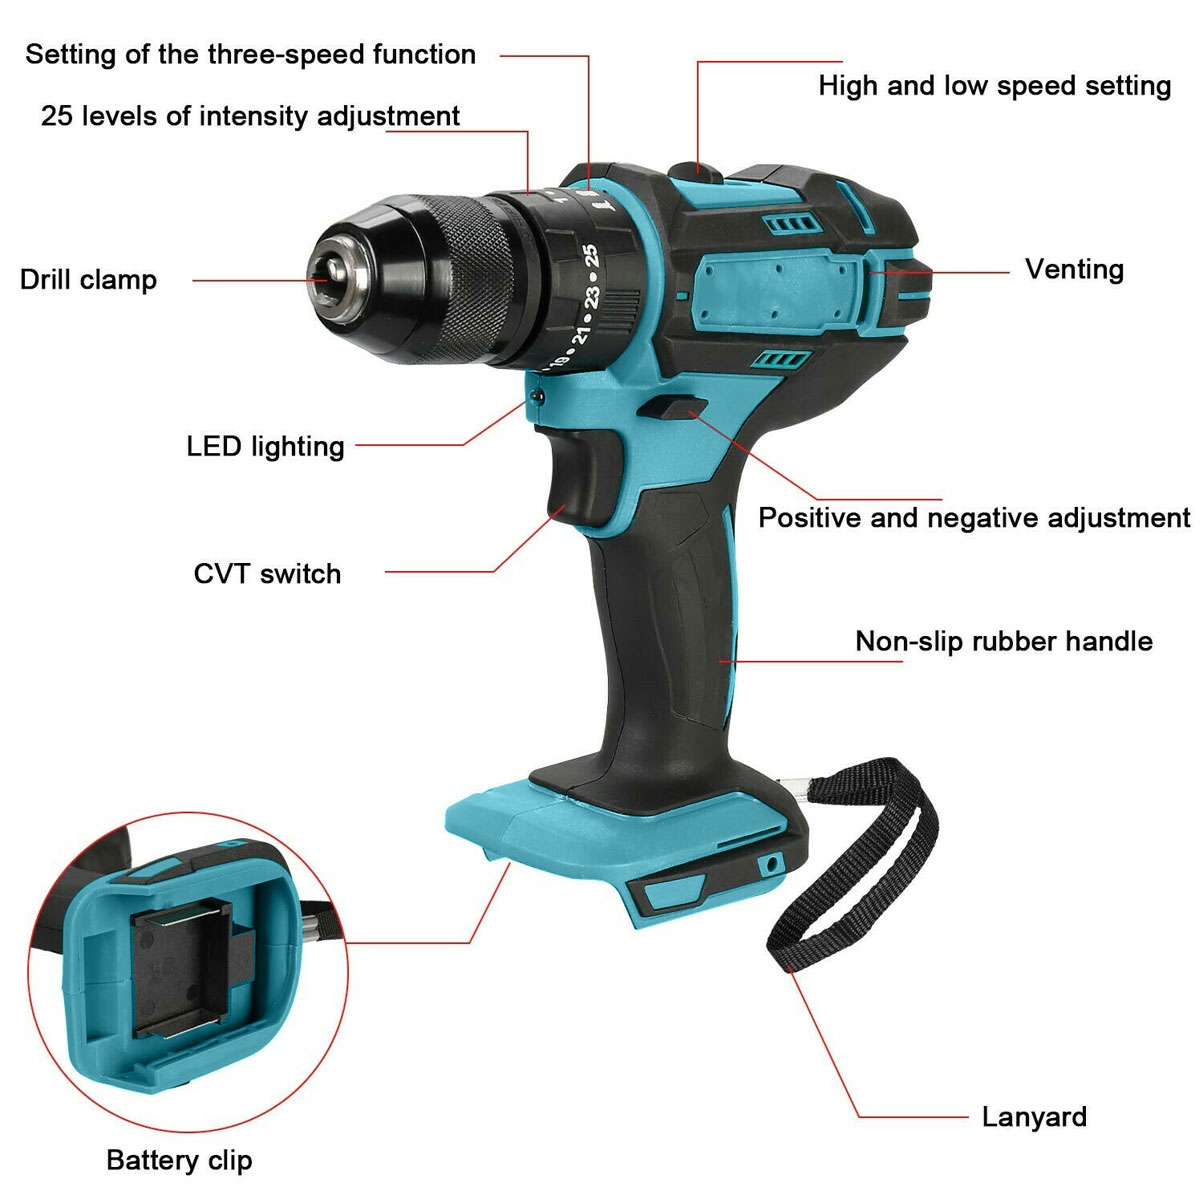 Wolike-13mm-800W-Cordless-Electirc-Impact-Drill-Driver-253-Torque-Electric-Drill-Screwdriver-1880979-11